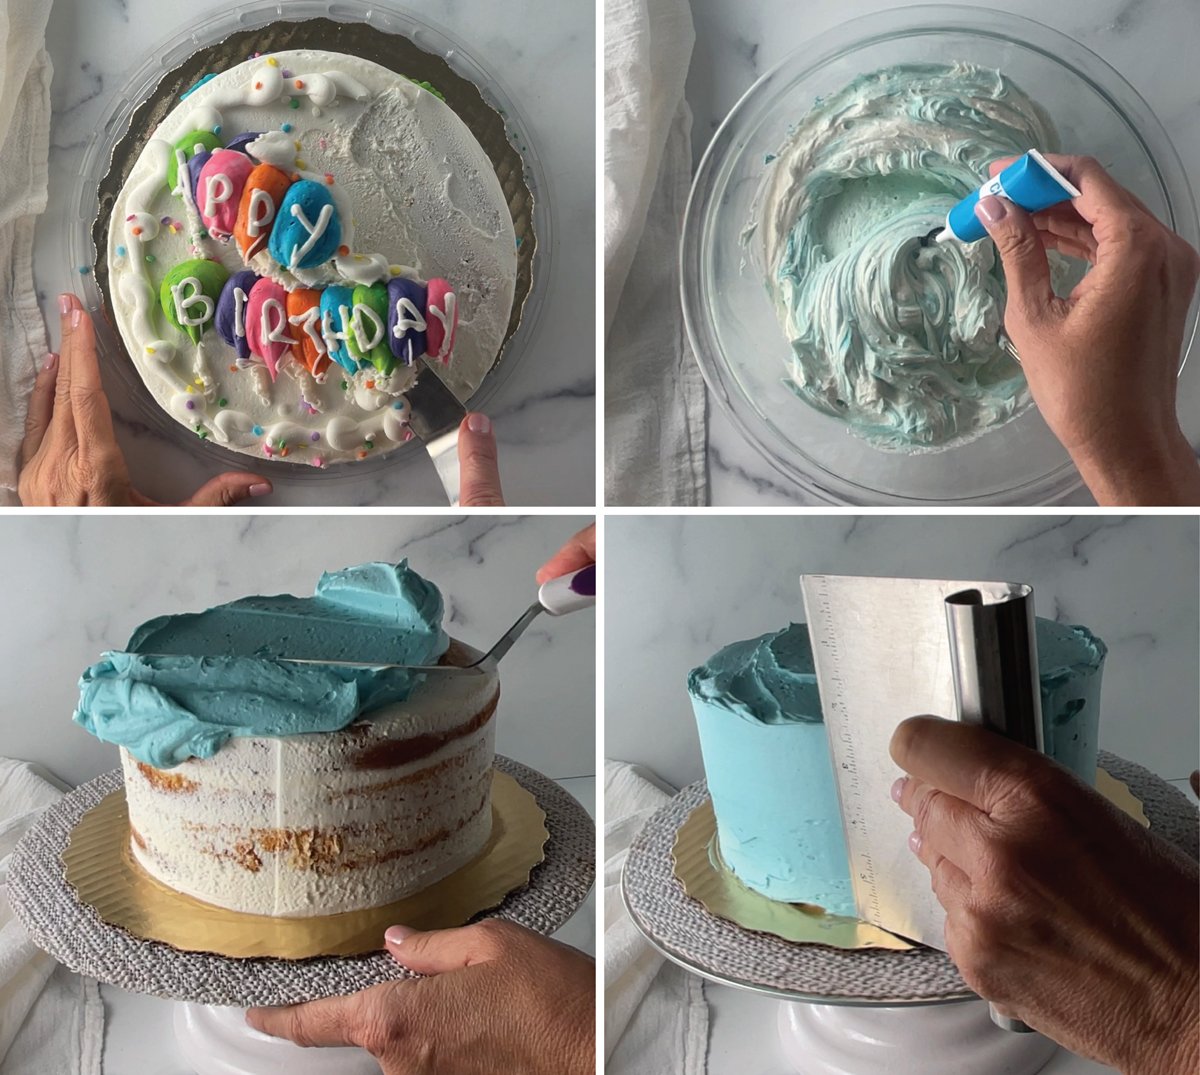 Steps showing how to do a cake makeover.